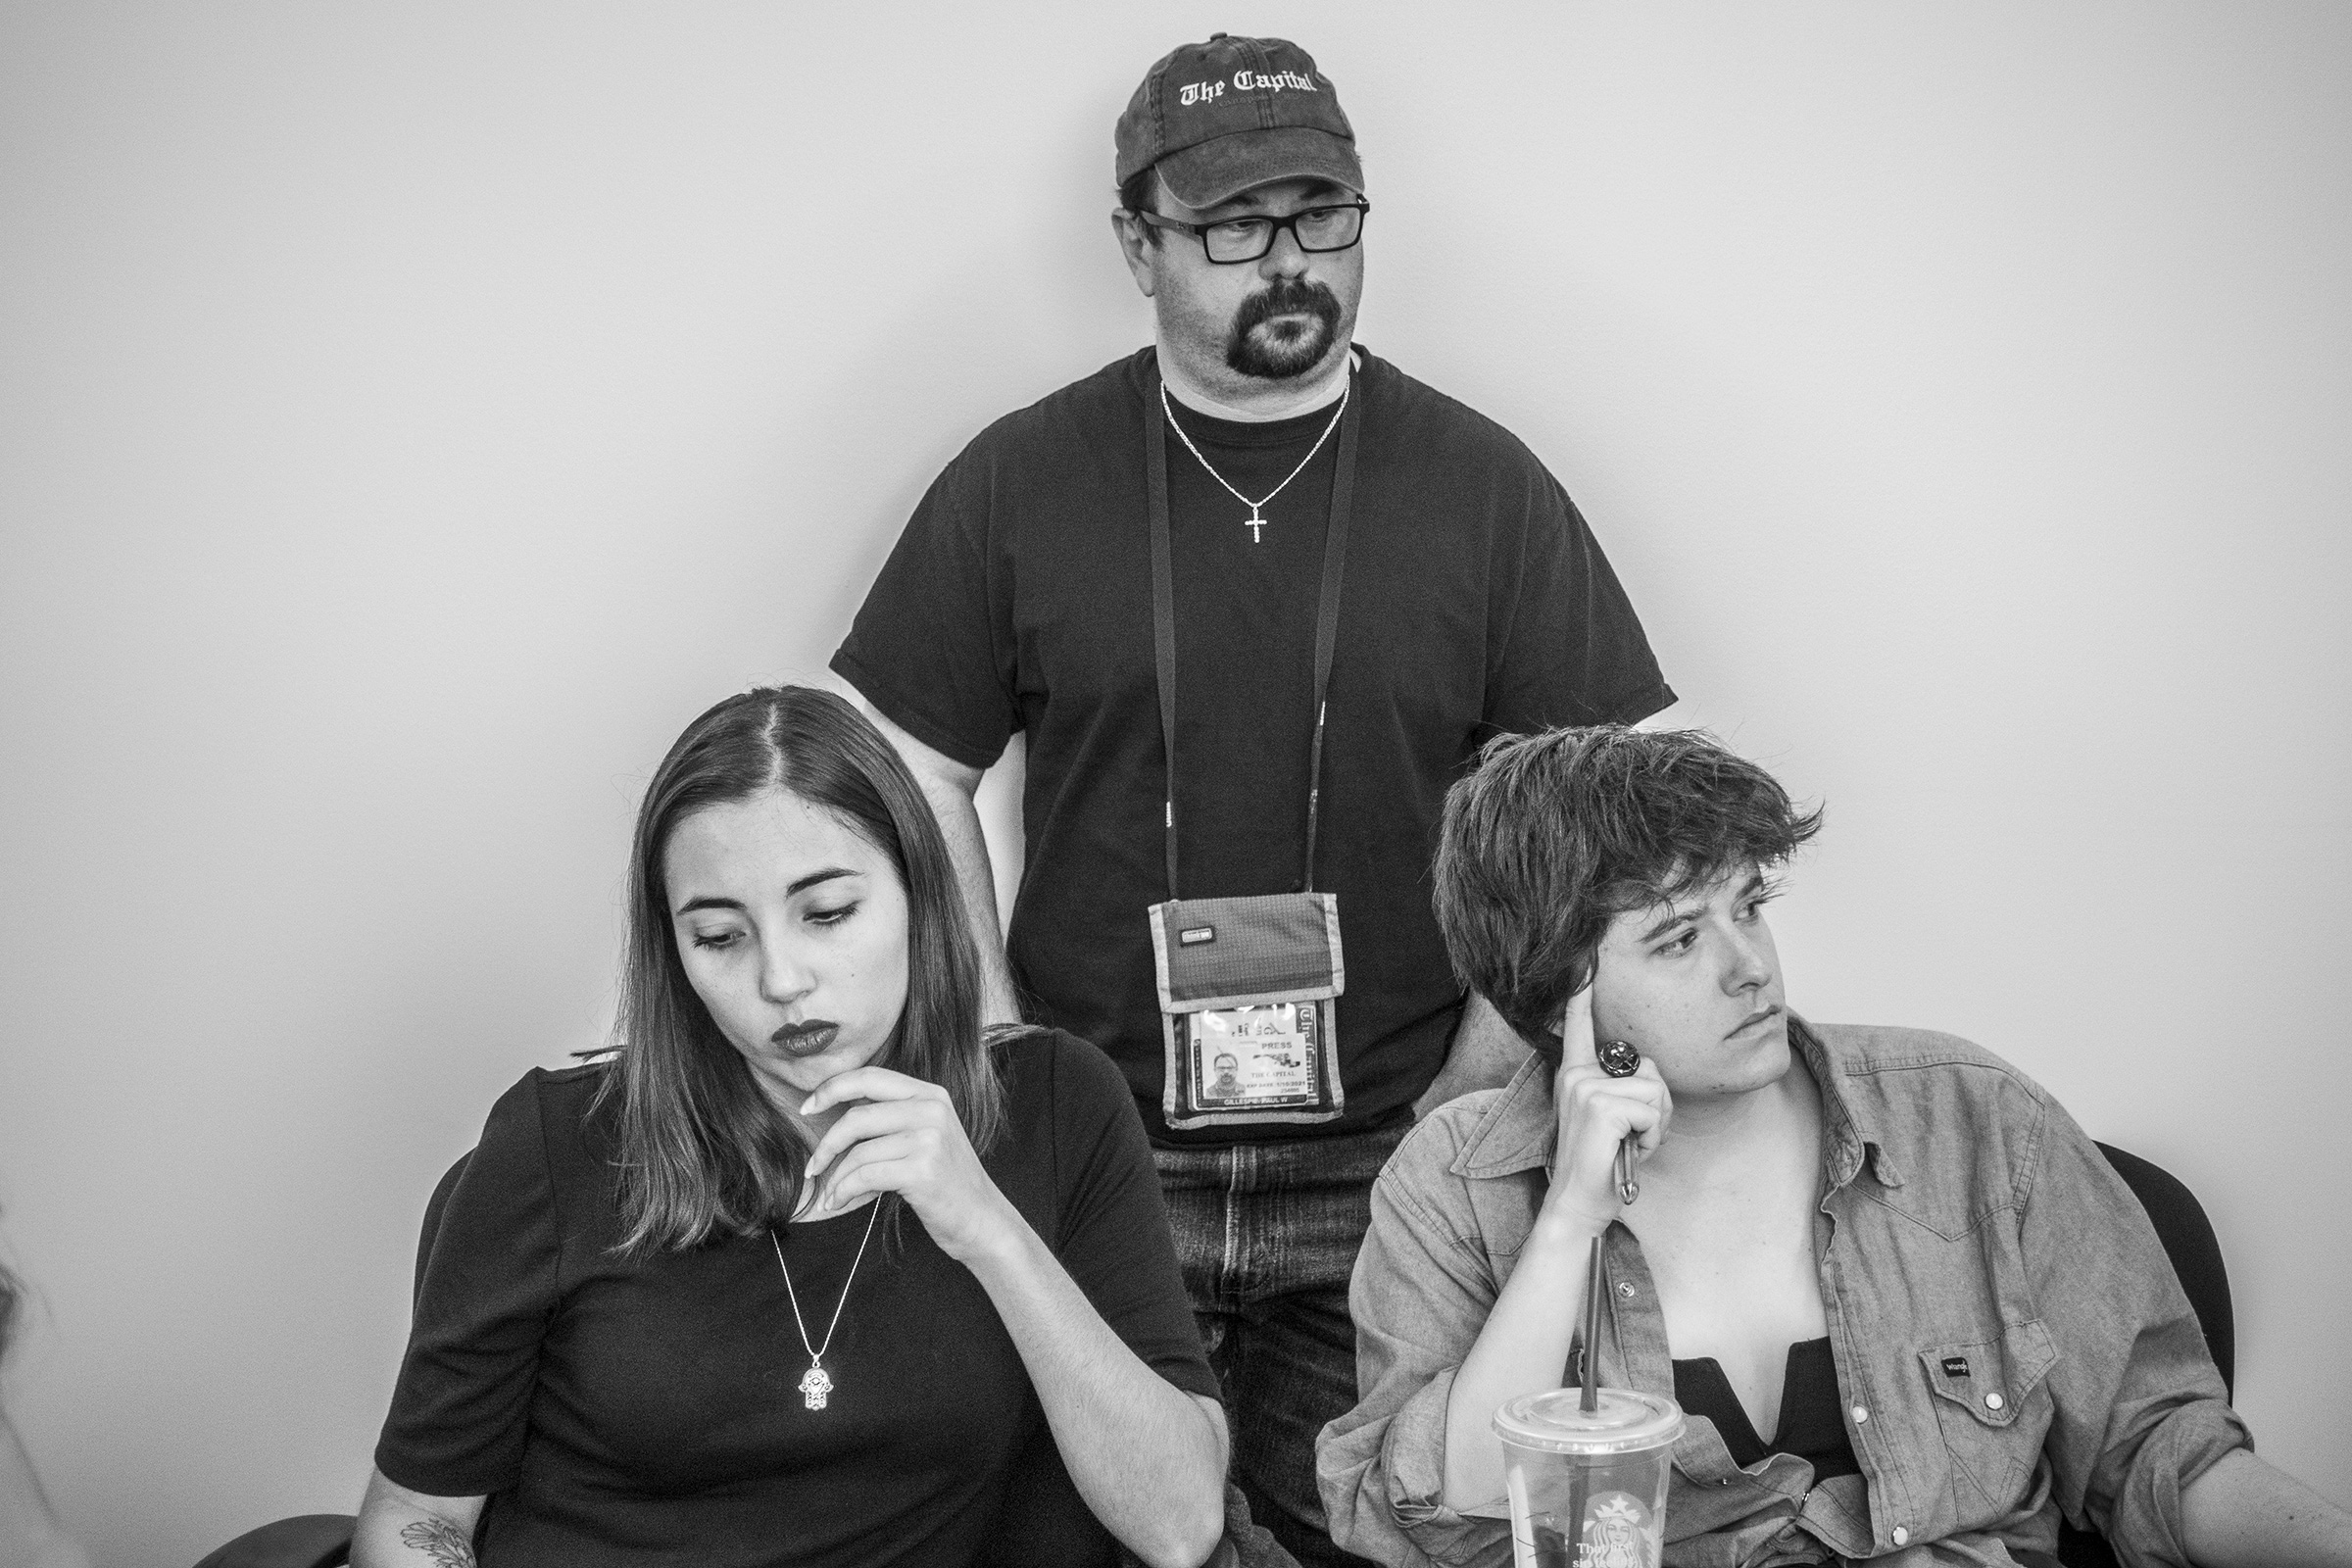 From left: Capital Gazette reporter Selene San Felice, photographer Paul Gillespie, and reporter Rachael Pacella, listen during a meeting at the newspaper, June 5, 2019. (Moises Saman—Magnum Photos for TIME)